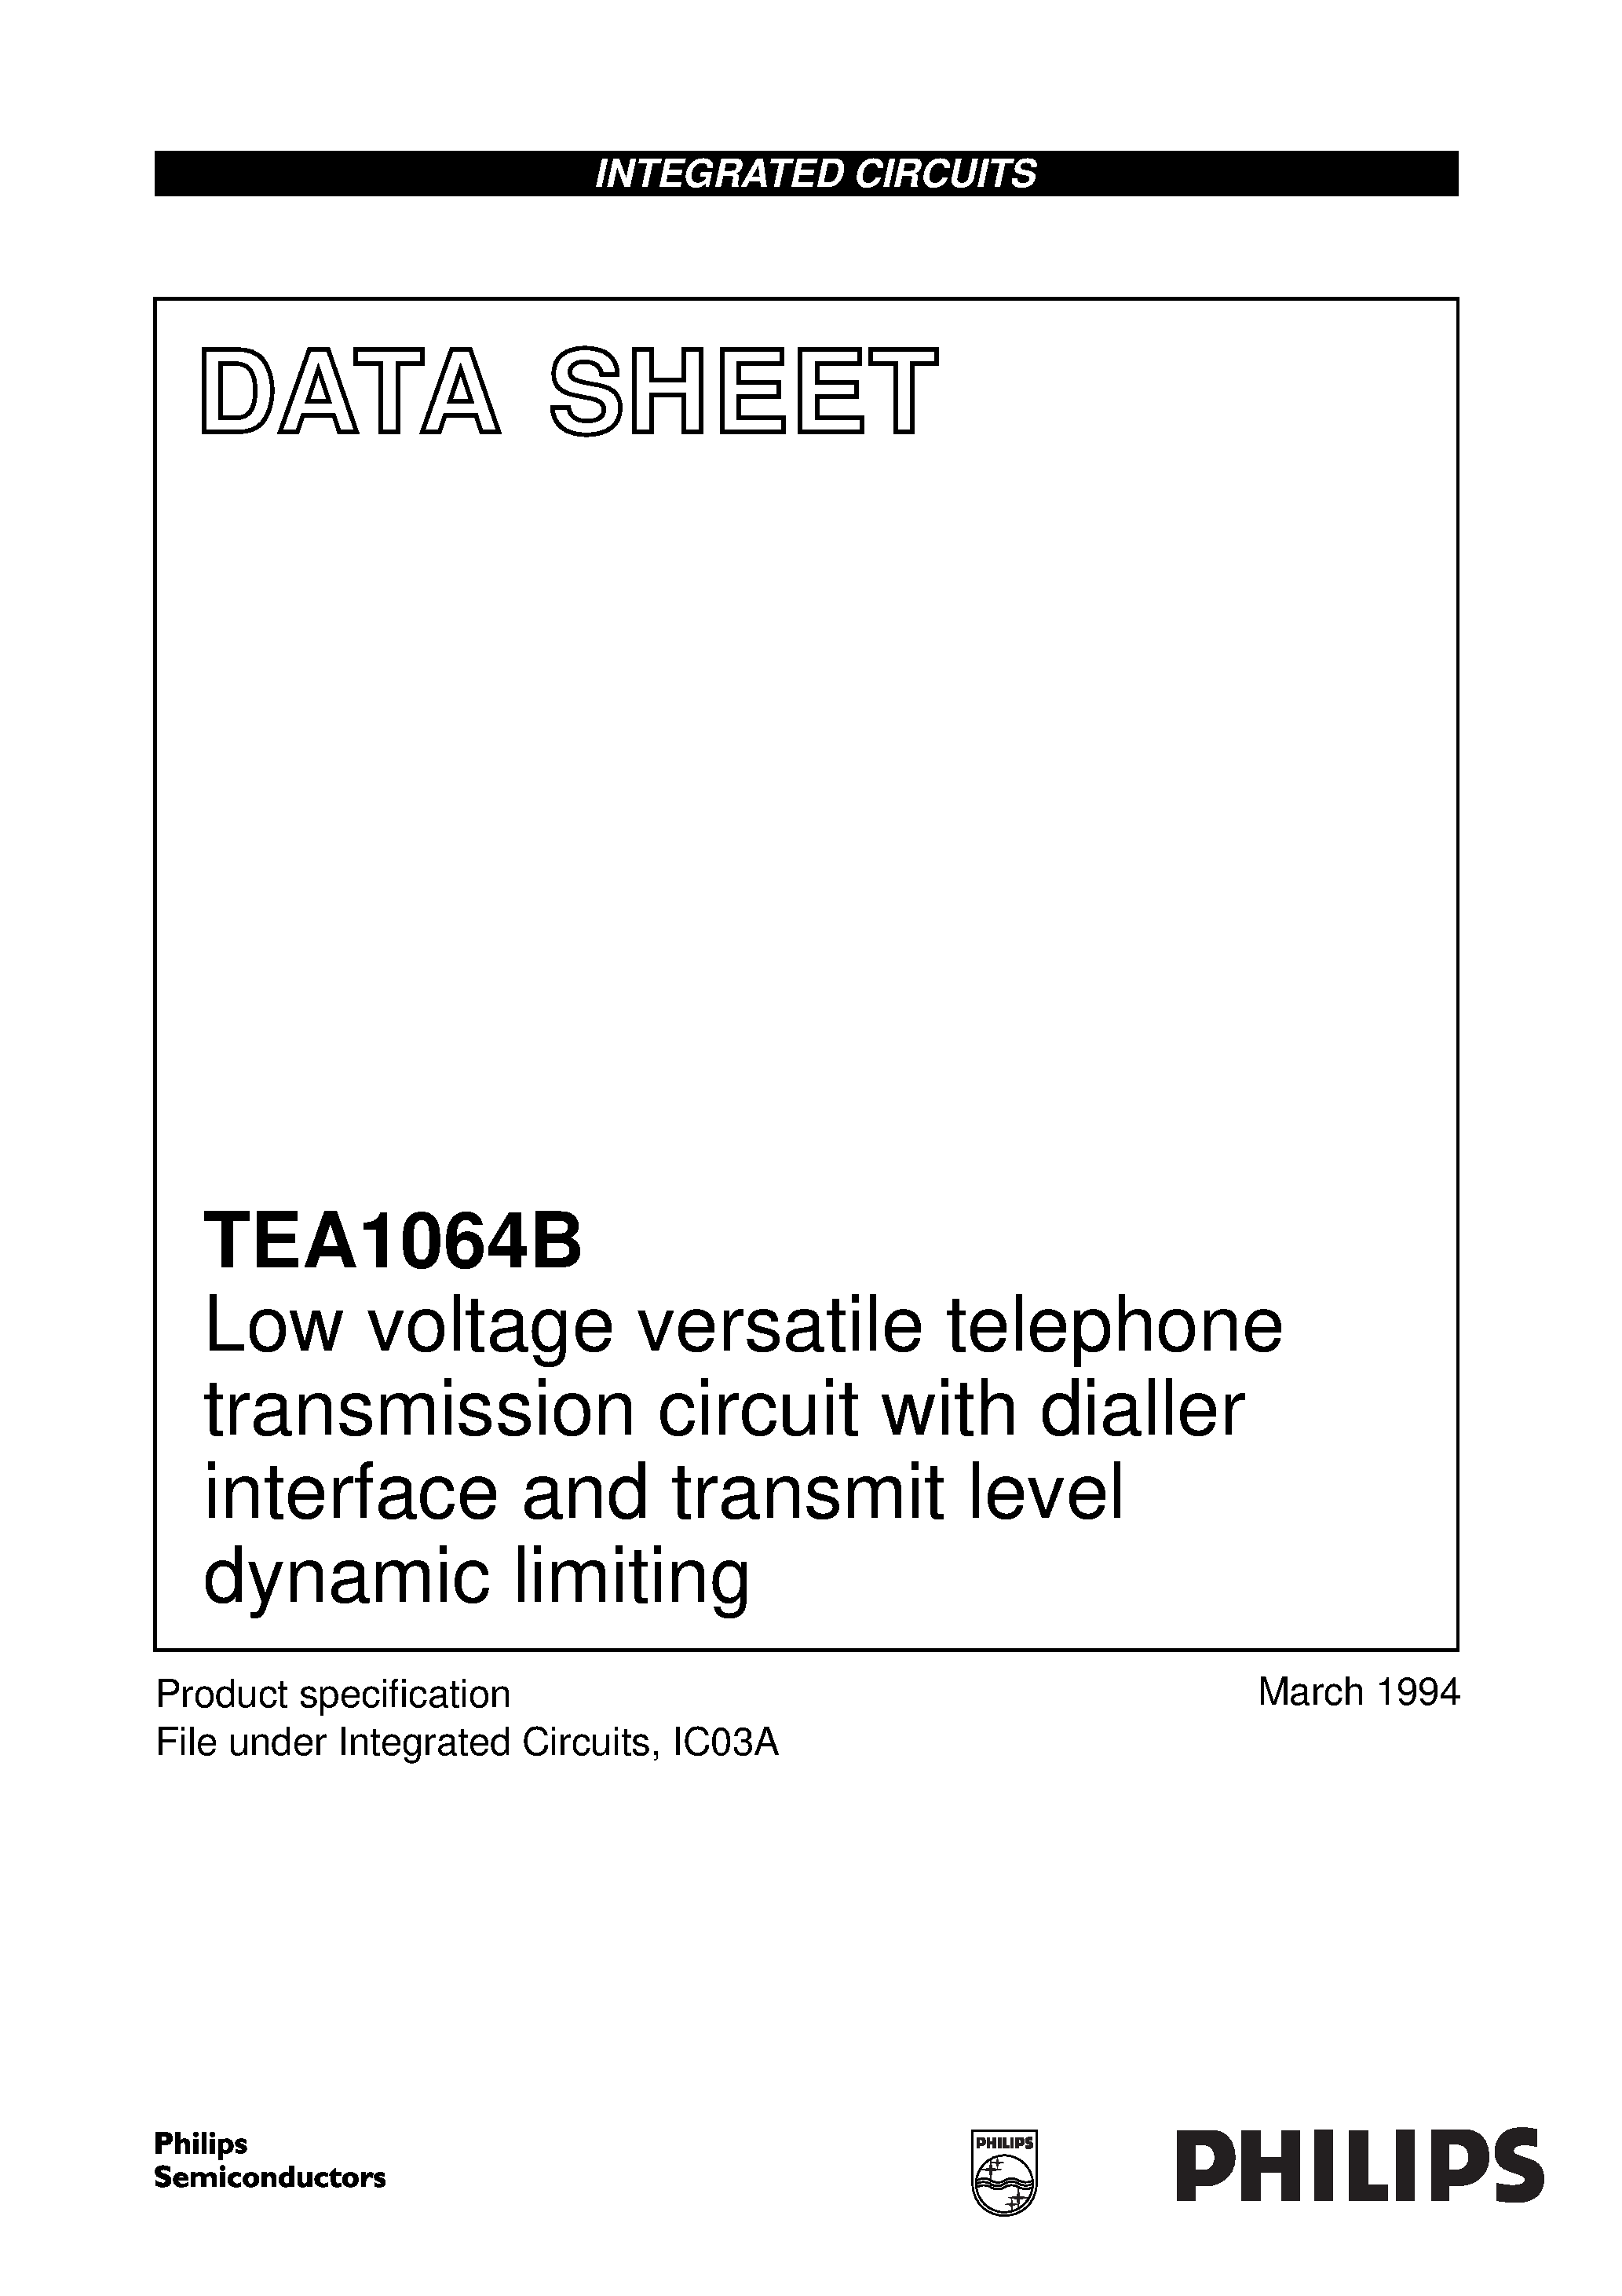 Datasheet TEA1064B - Low voltage versatile telephone transmission circuit with dialler interface and transmit level dynamic limiting page 1